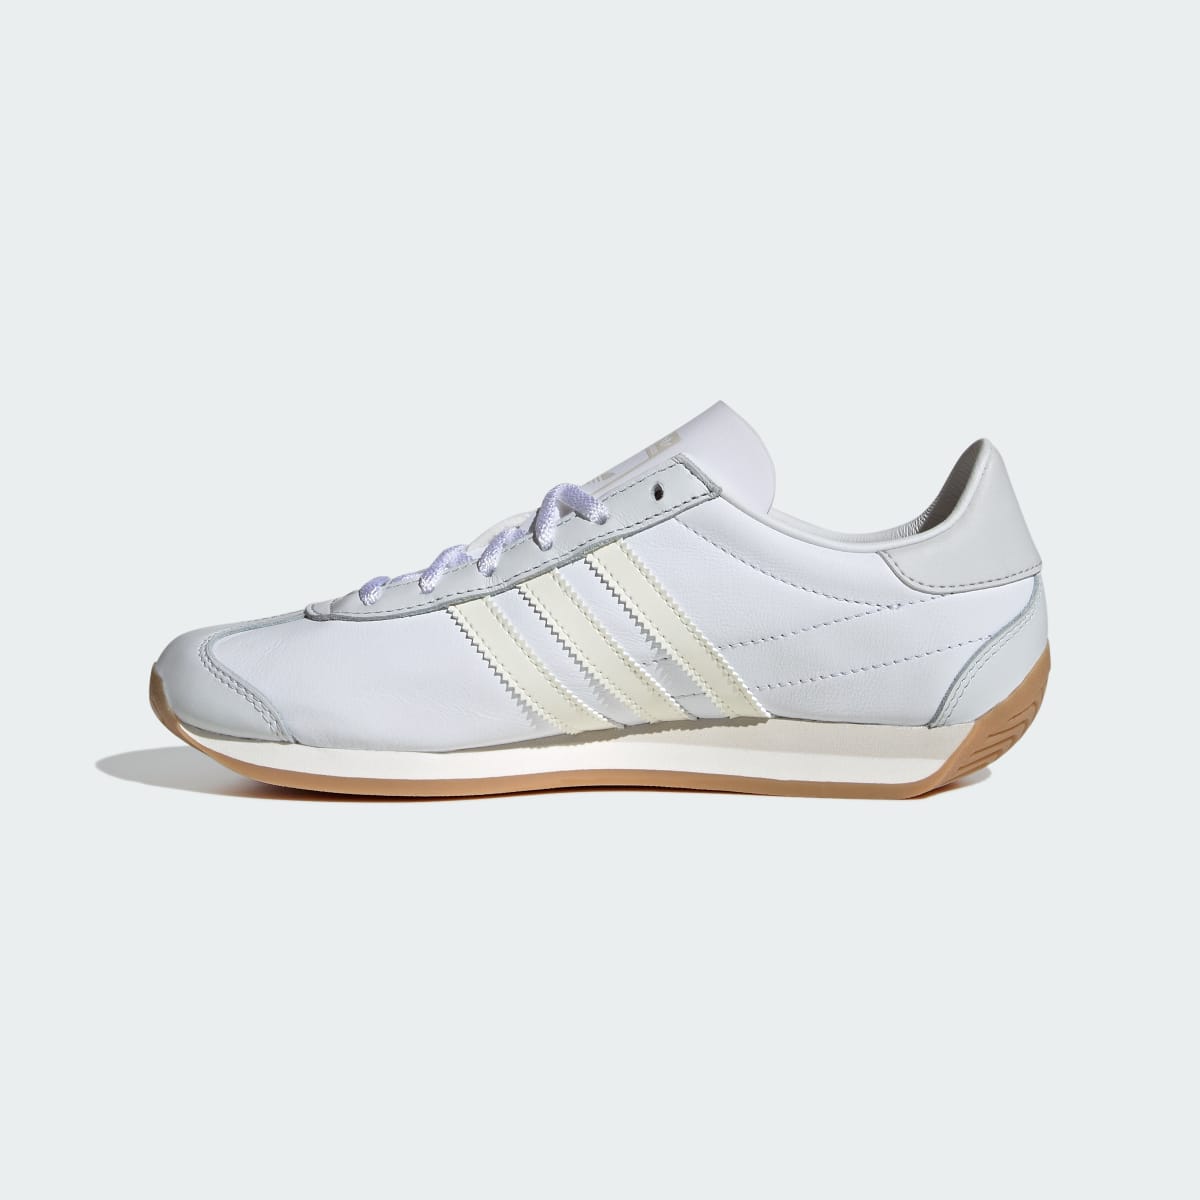 Adidas Country OG Shoes. 7